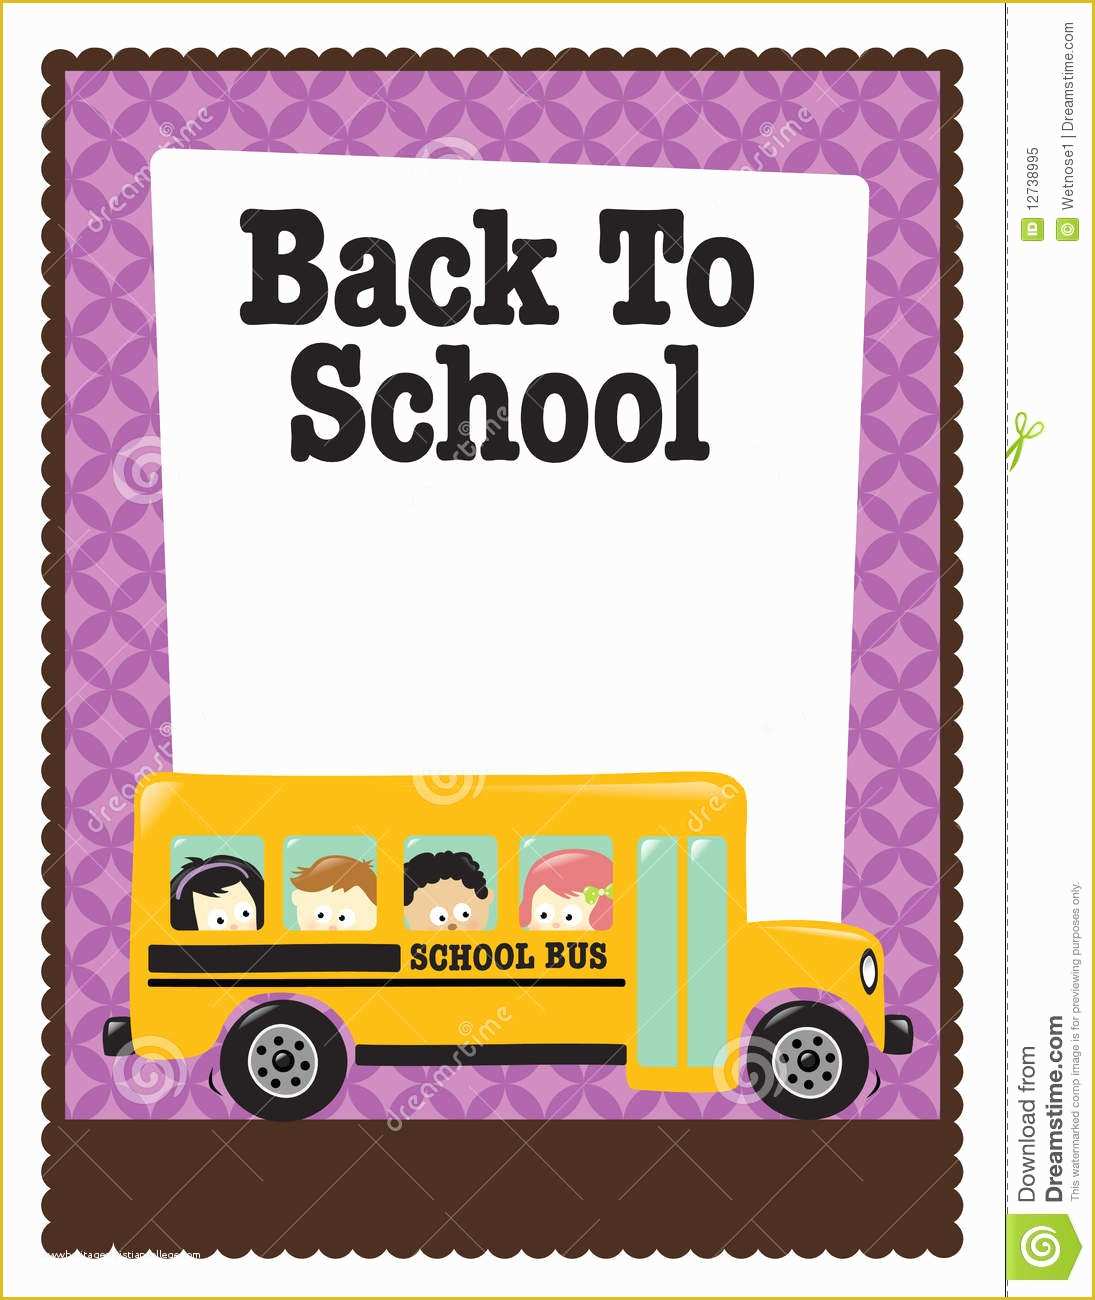 8.5 X 11 Flyer Template Free Of 8 5x11 School Flyer W Bus and Kids Stock Vector Image